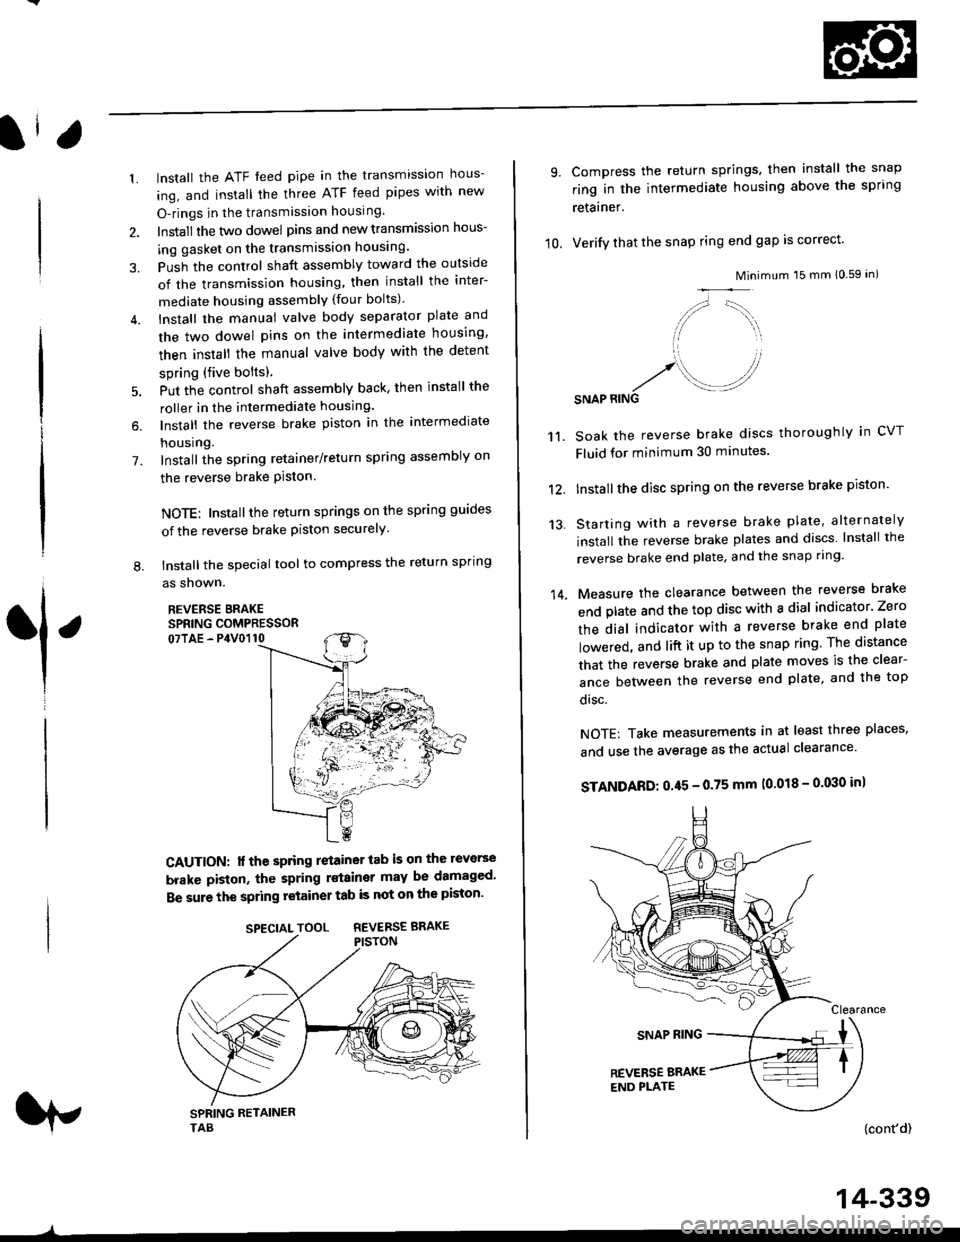 HONDA CIVIC 1997 6.G Owners Manual 1.
7.
lnstall the ATF feed pipe in the transmission hous-
ing, and install the three ATF feed pipes with new
O-rings in the transmission housing,
Install the two dowel pins and new transmission hous-
